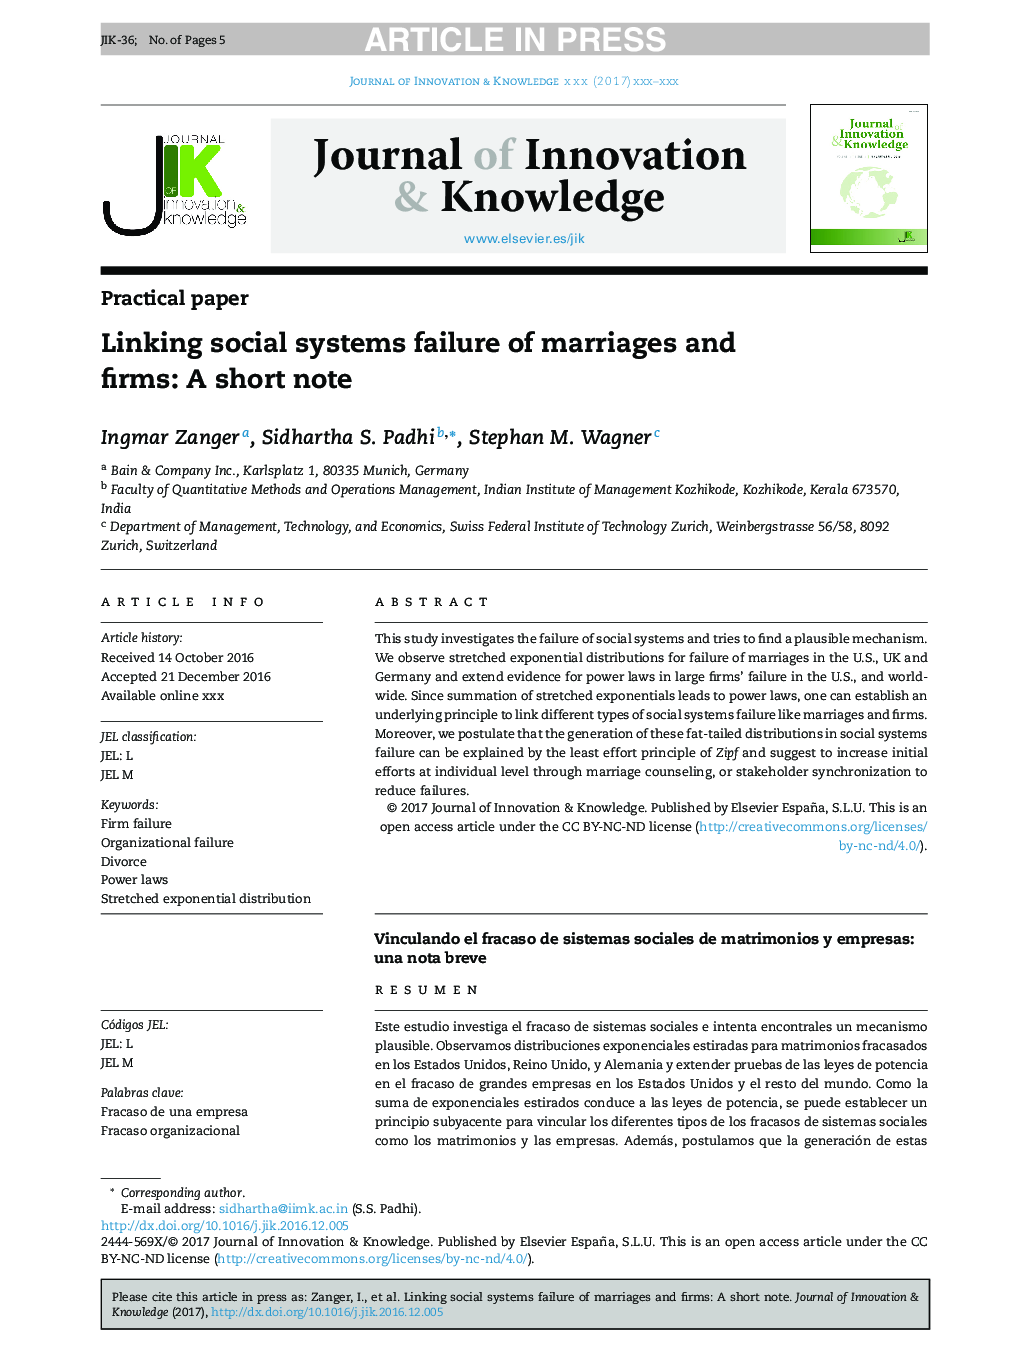 Linking social system failures: A short note on marriage and firm failure